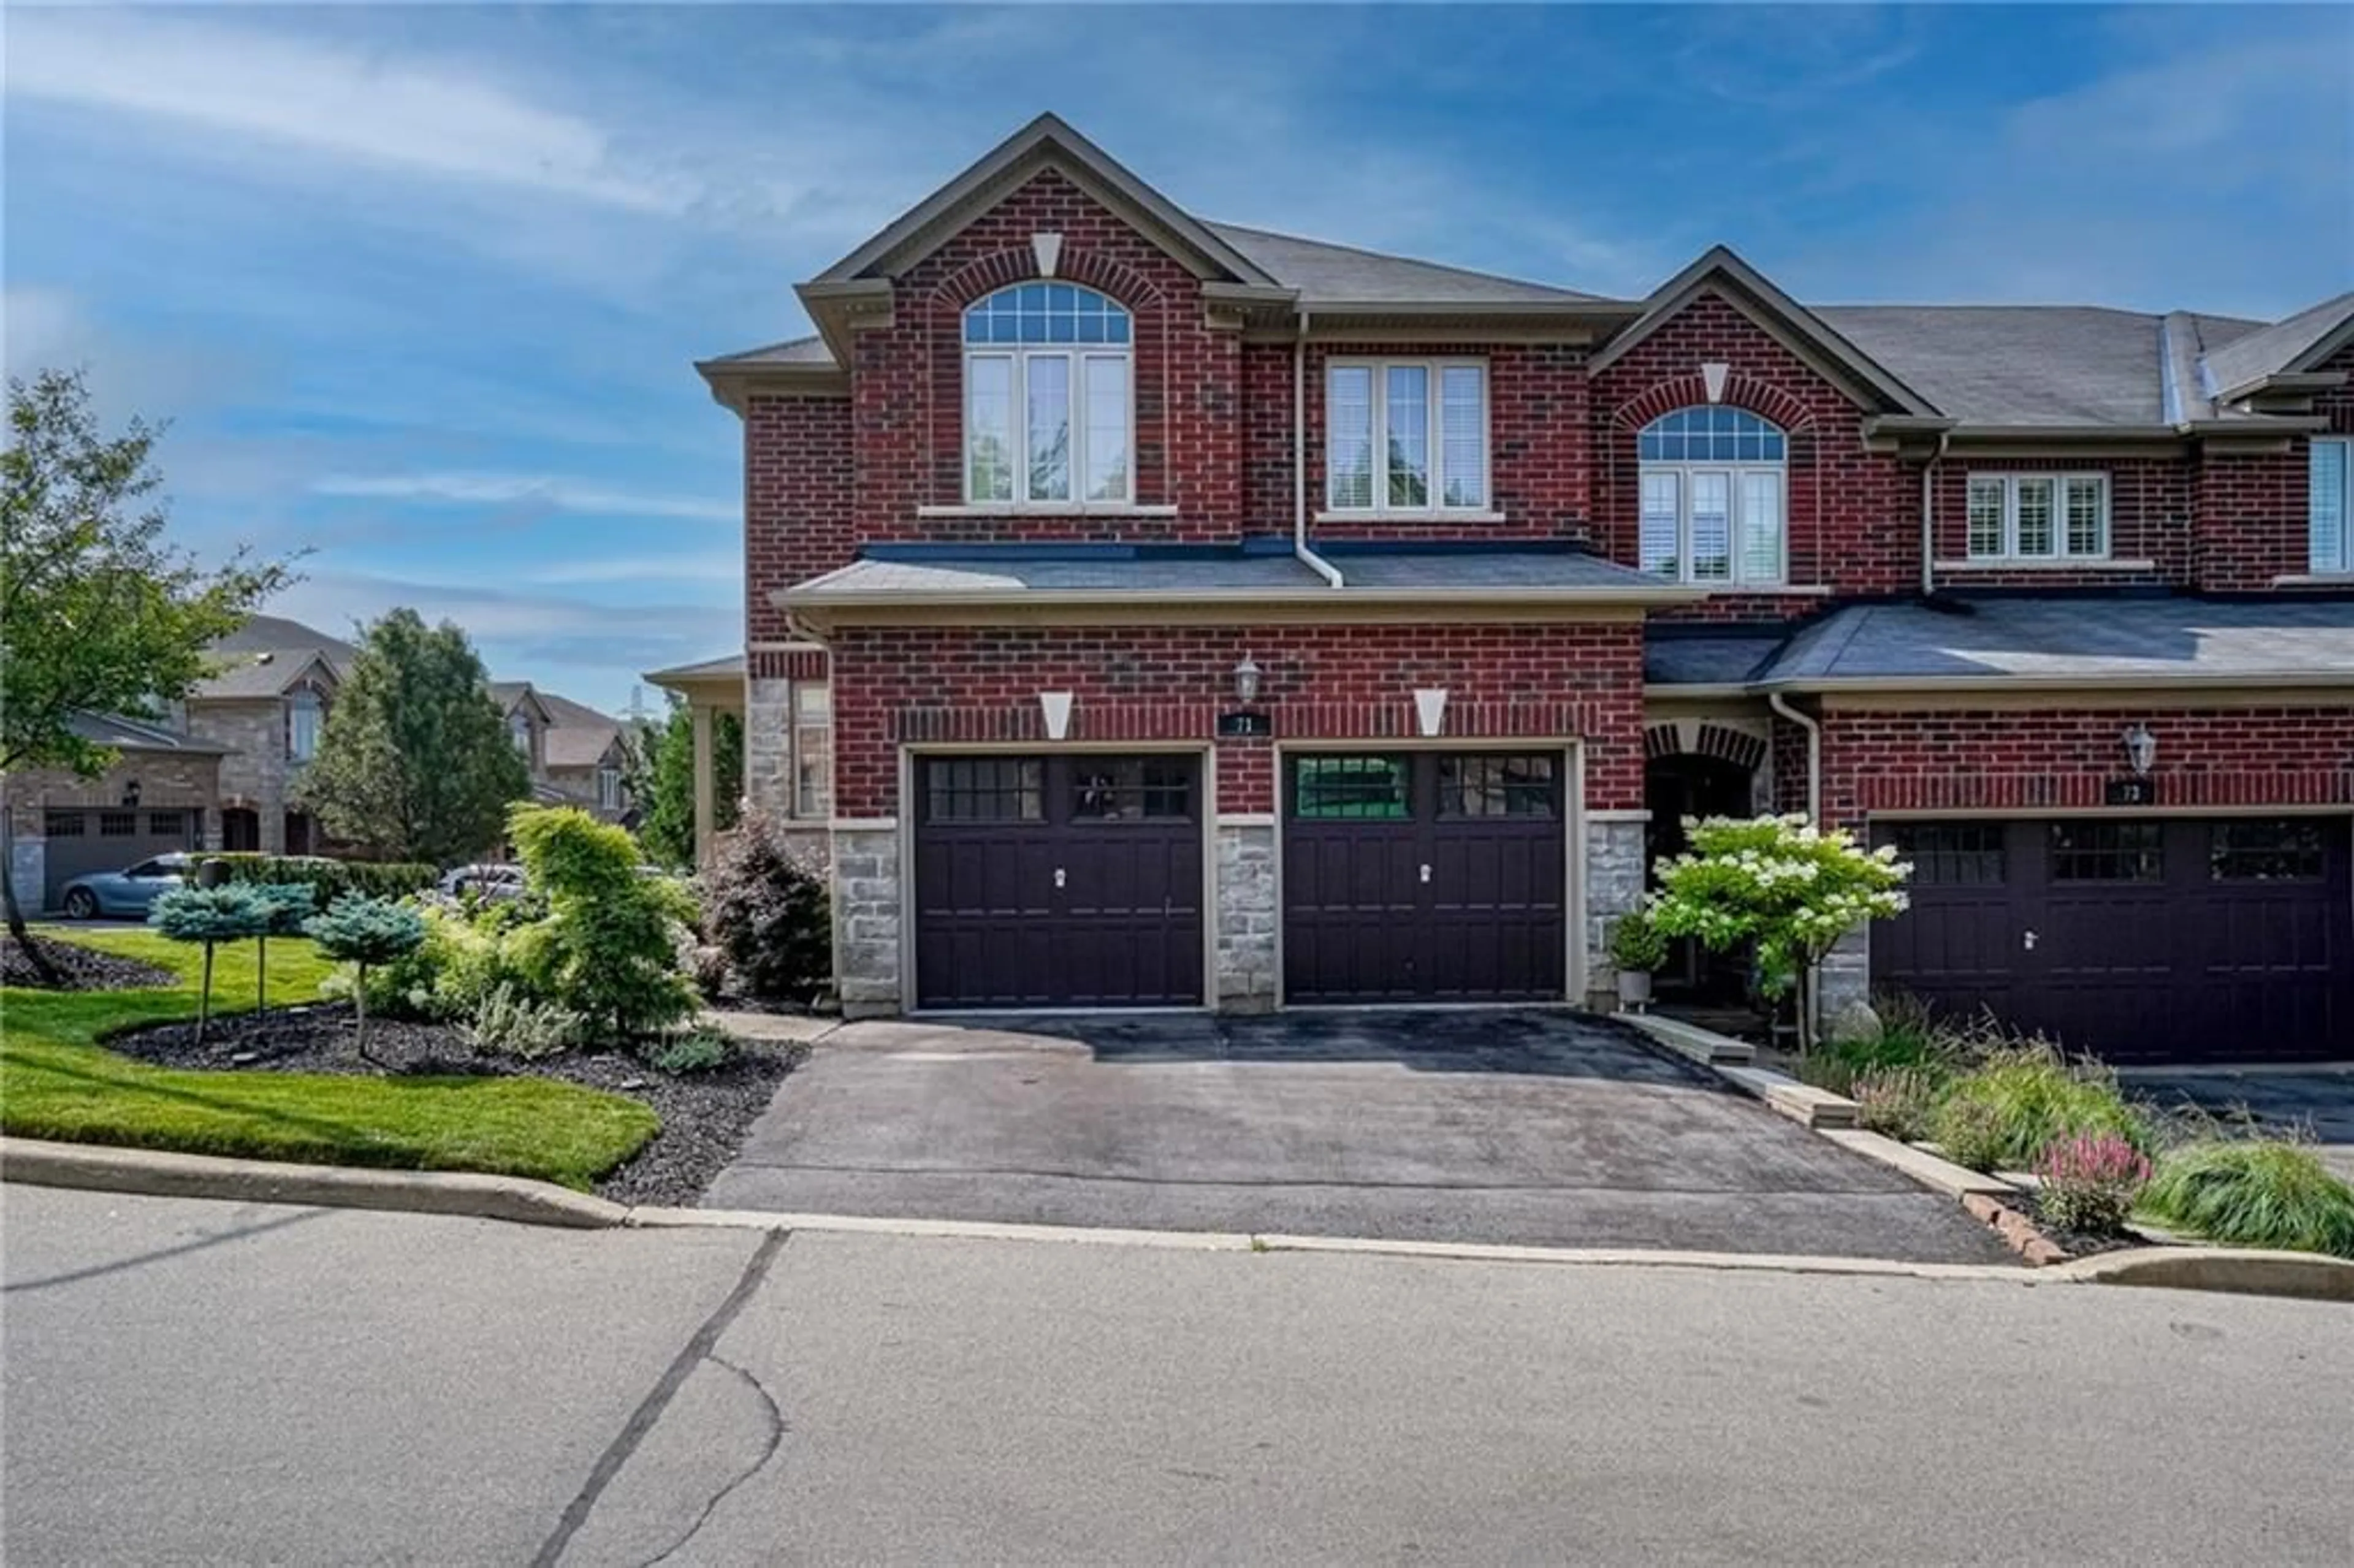 Home with brick exterior material for 71 Oakhaven Pl, Ancaster Ontario L9H 0B6